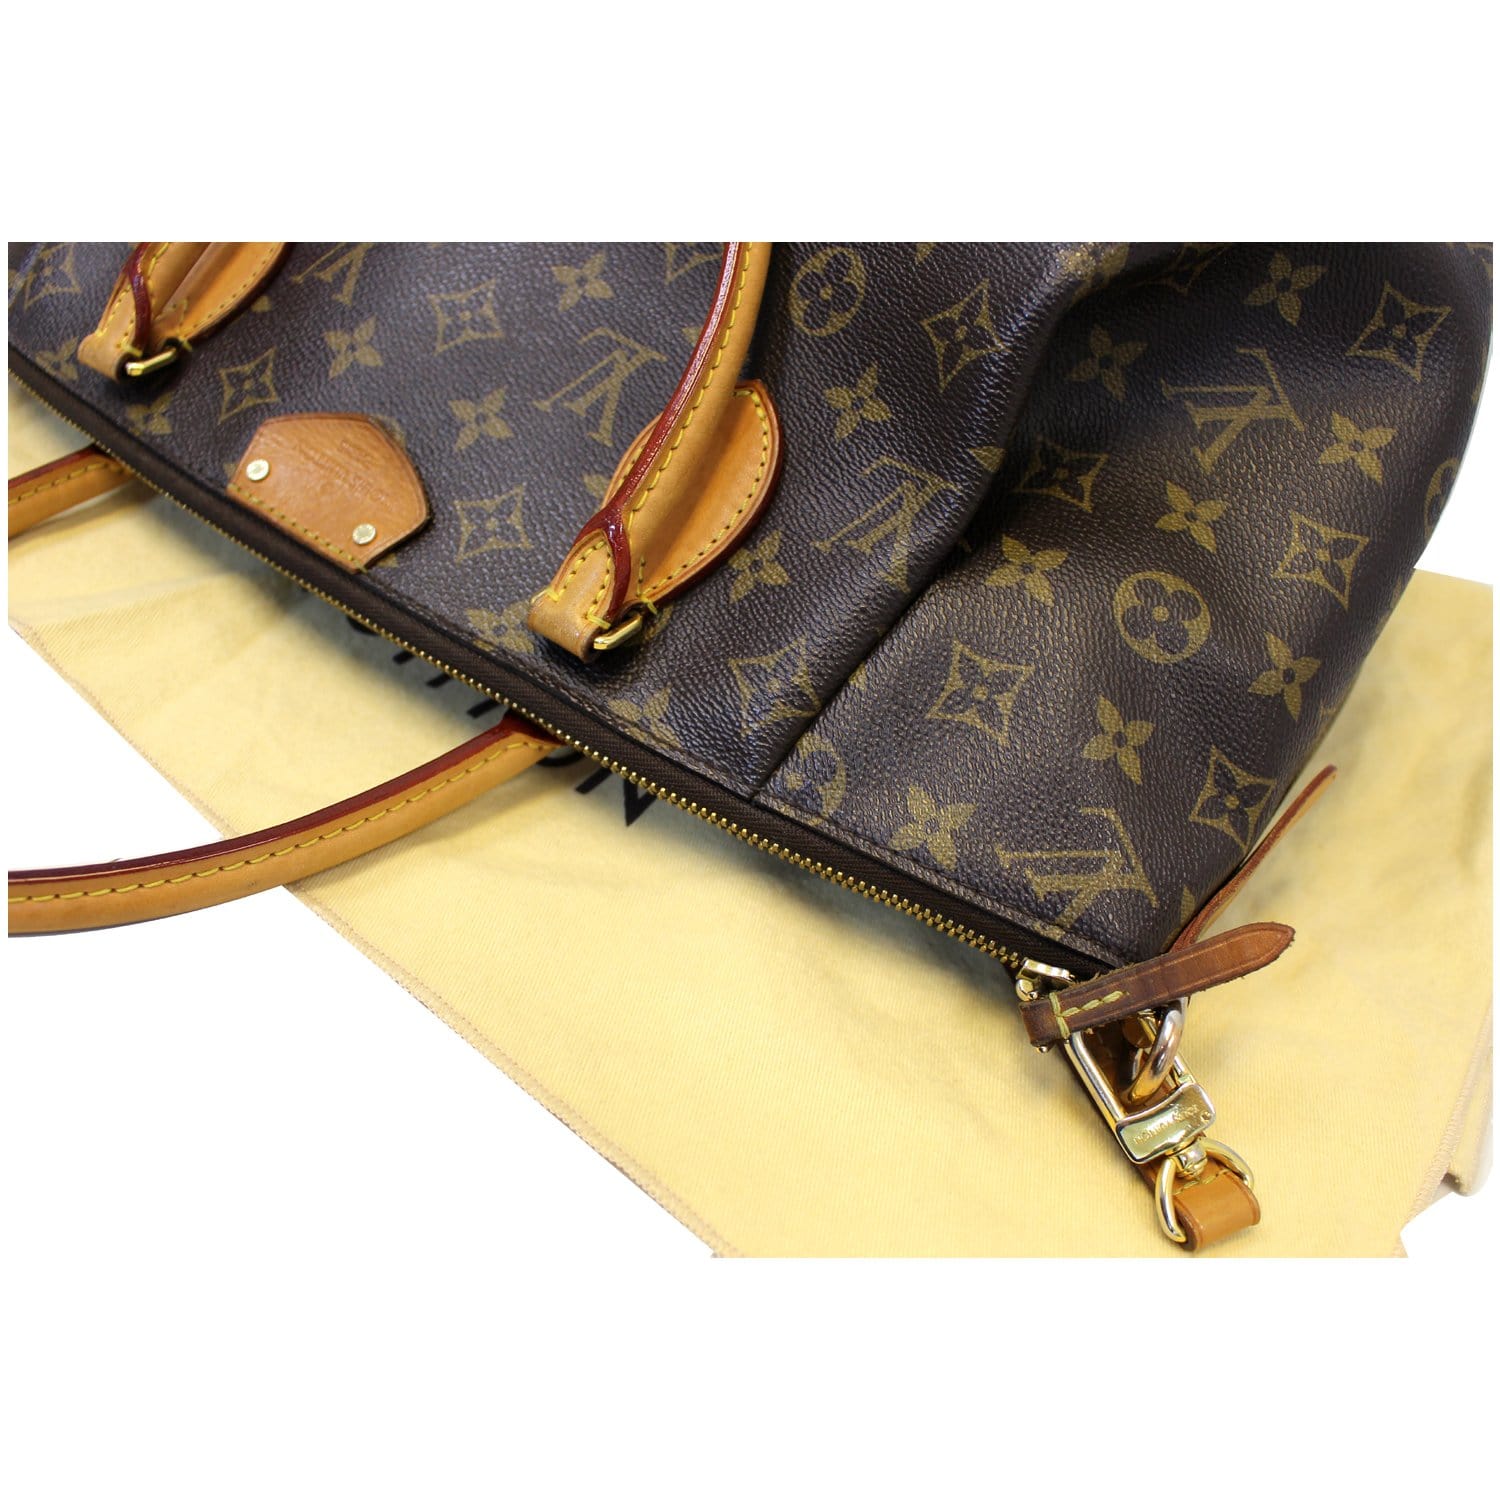 Louis Vuitton Turenne GM JUST IN! Call/text us at ***-***-**** if